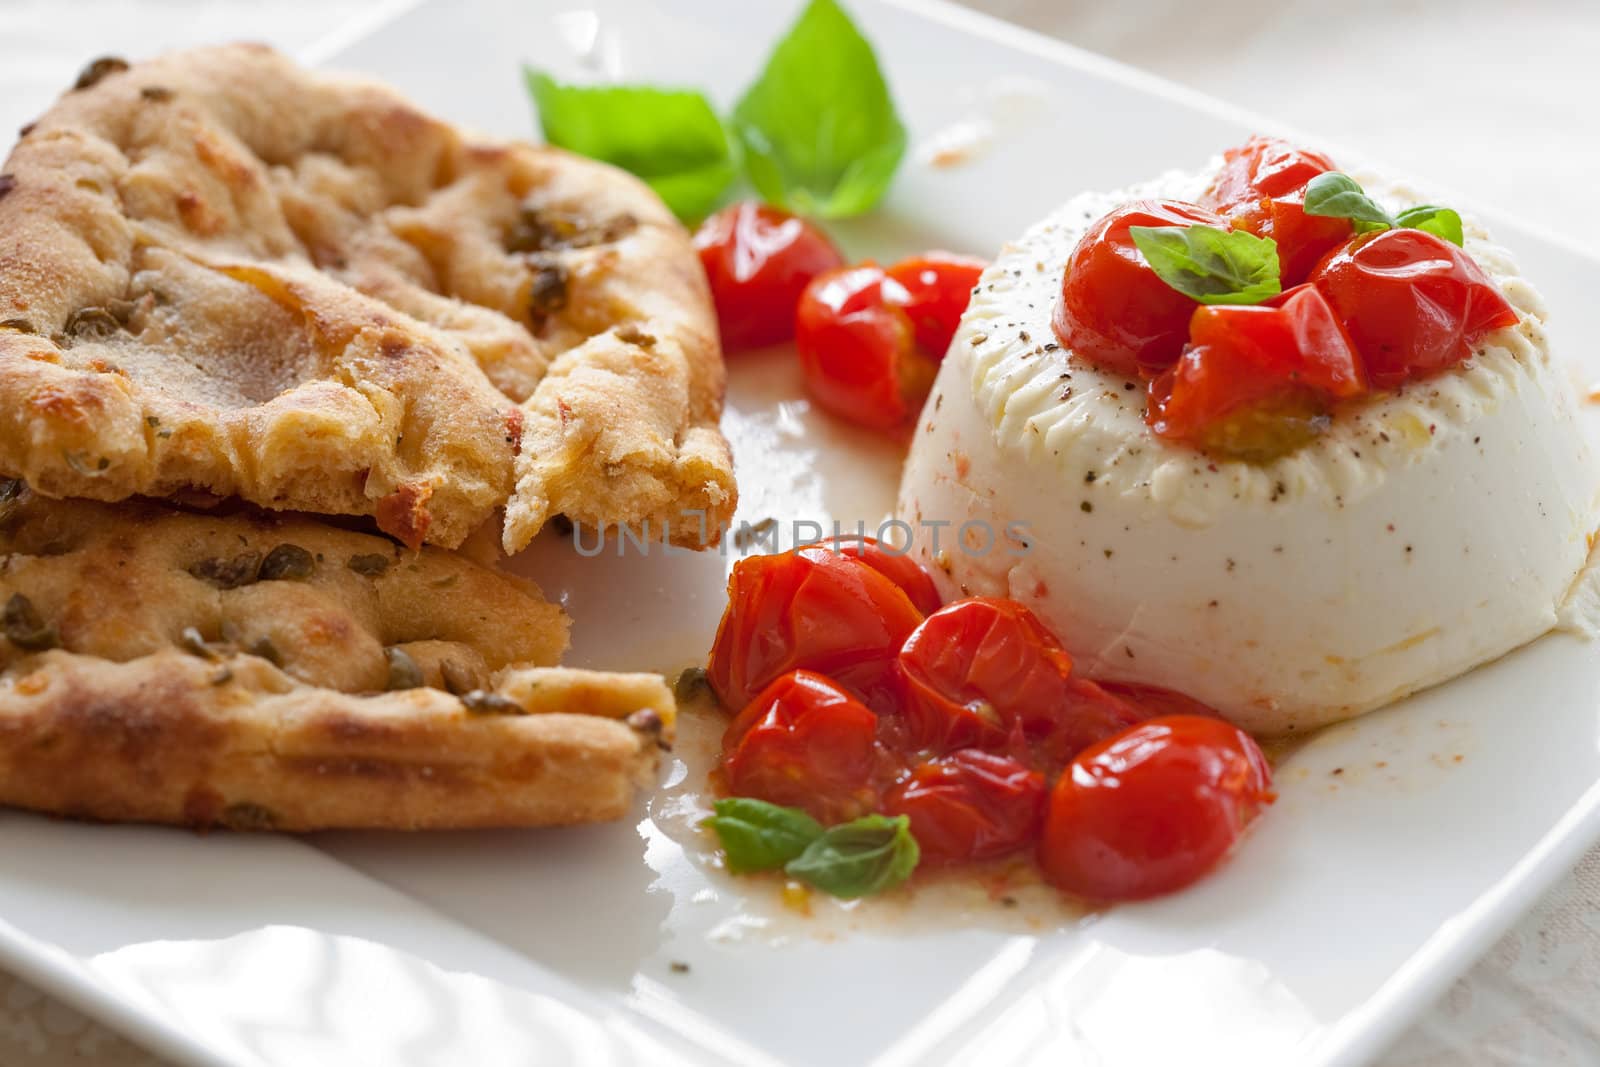 Delicious roasted ricotta with focaccia bread and tomatoes